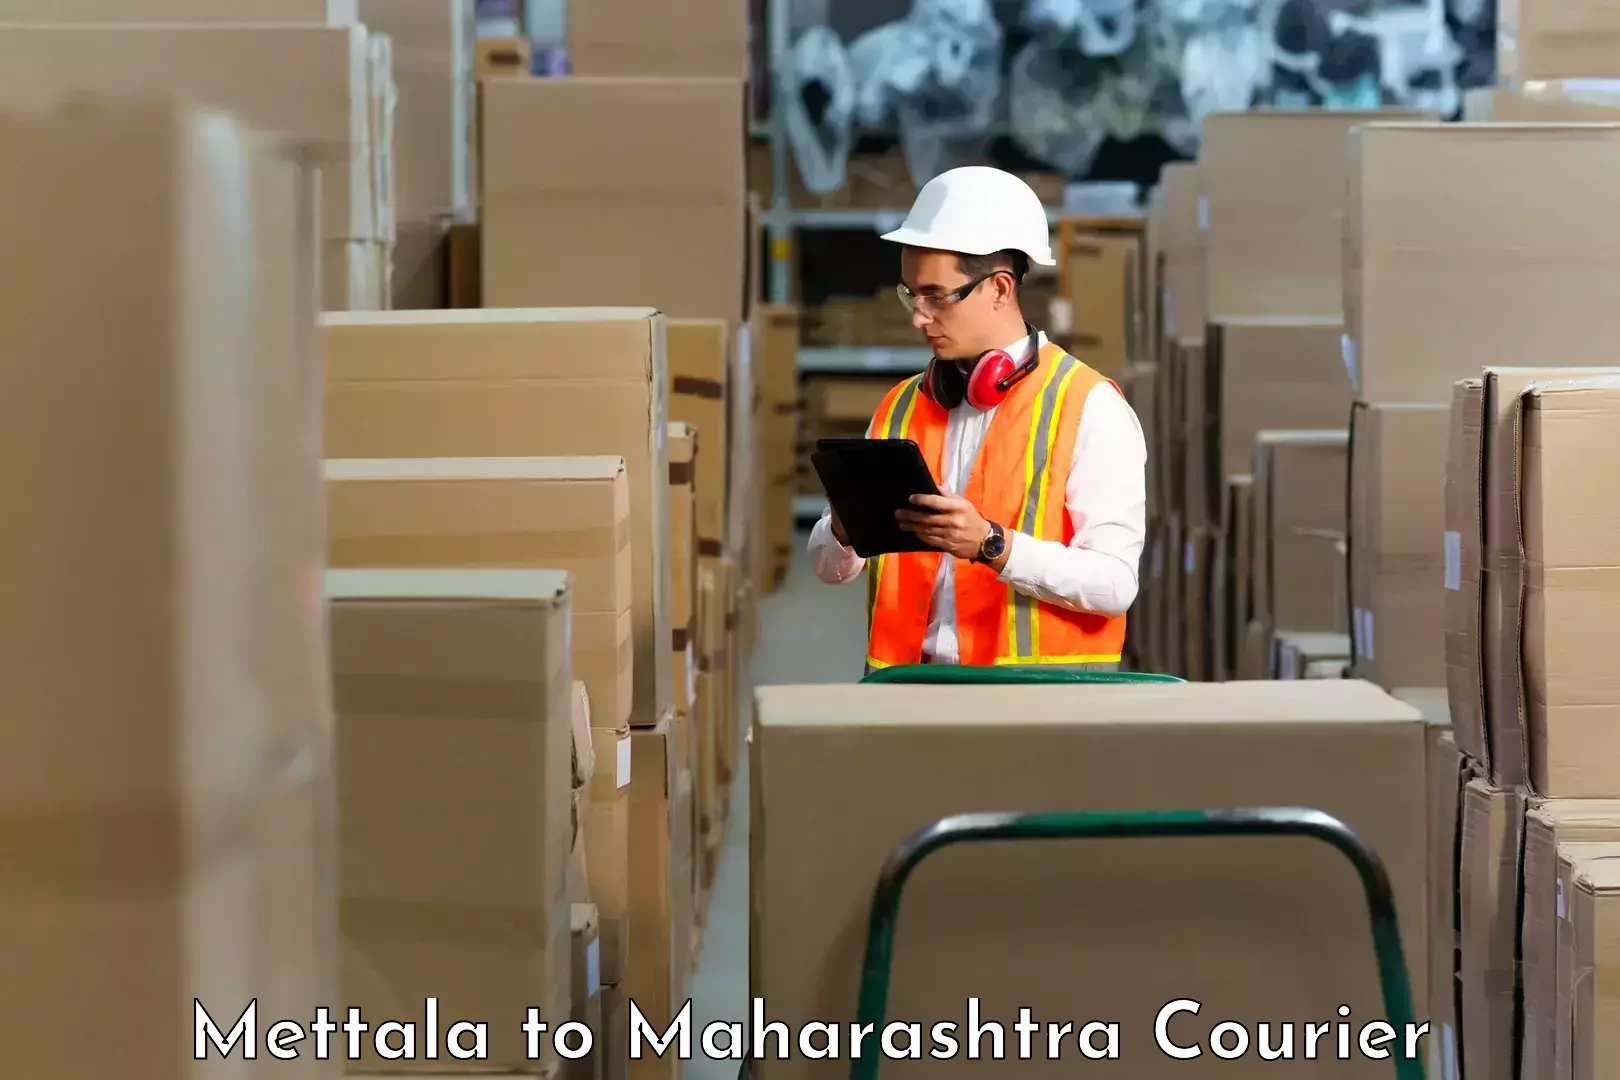 Efficient courier operations Mettala to Yeola